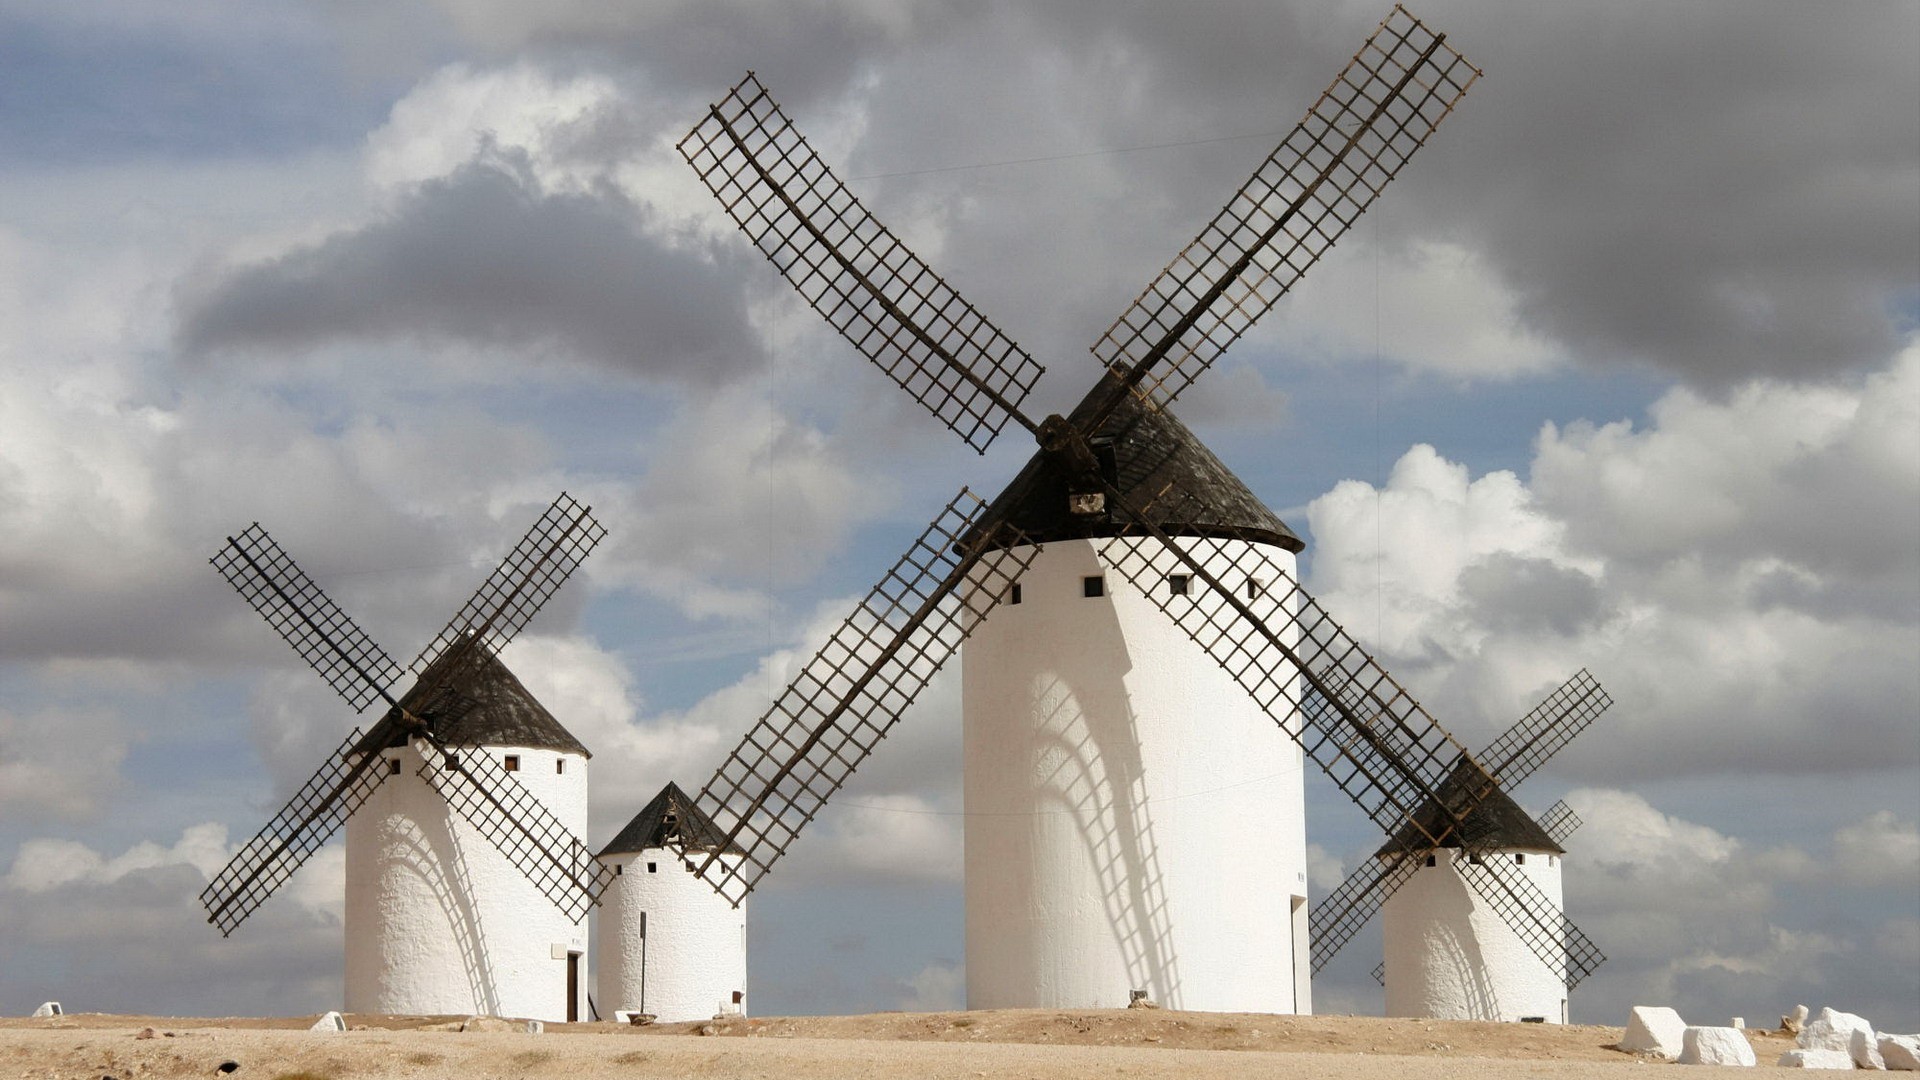 General 1920x1080 outdoors clouds windmill